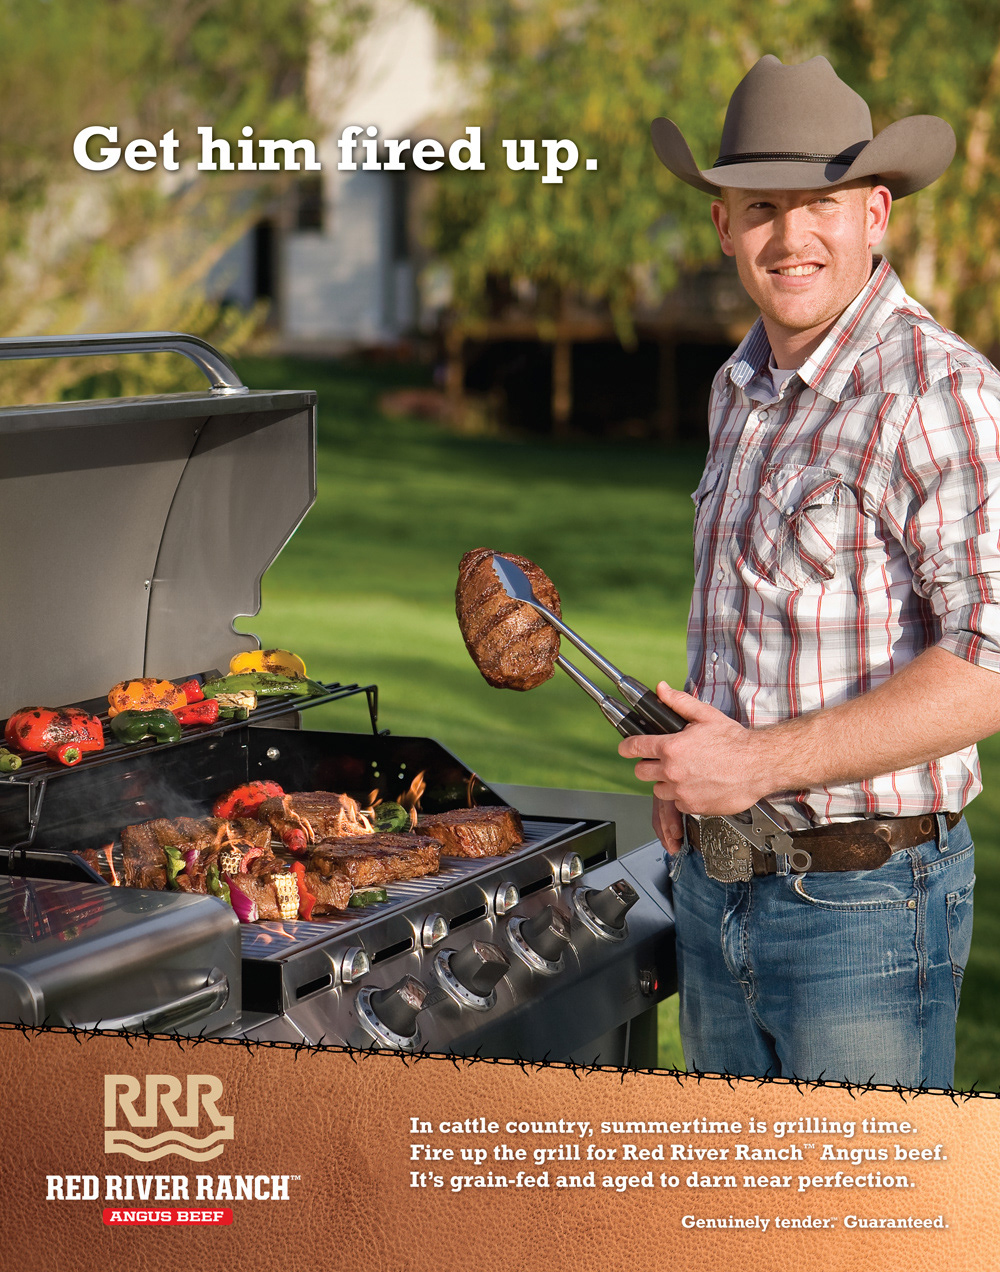 Red River Ranch angus beef Cowboy Jimmy Homeland Stores barbecue grilling steak grill oklahoma